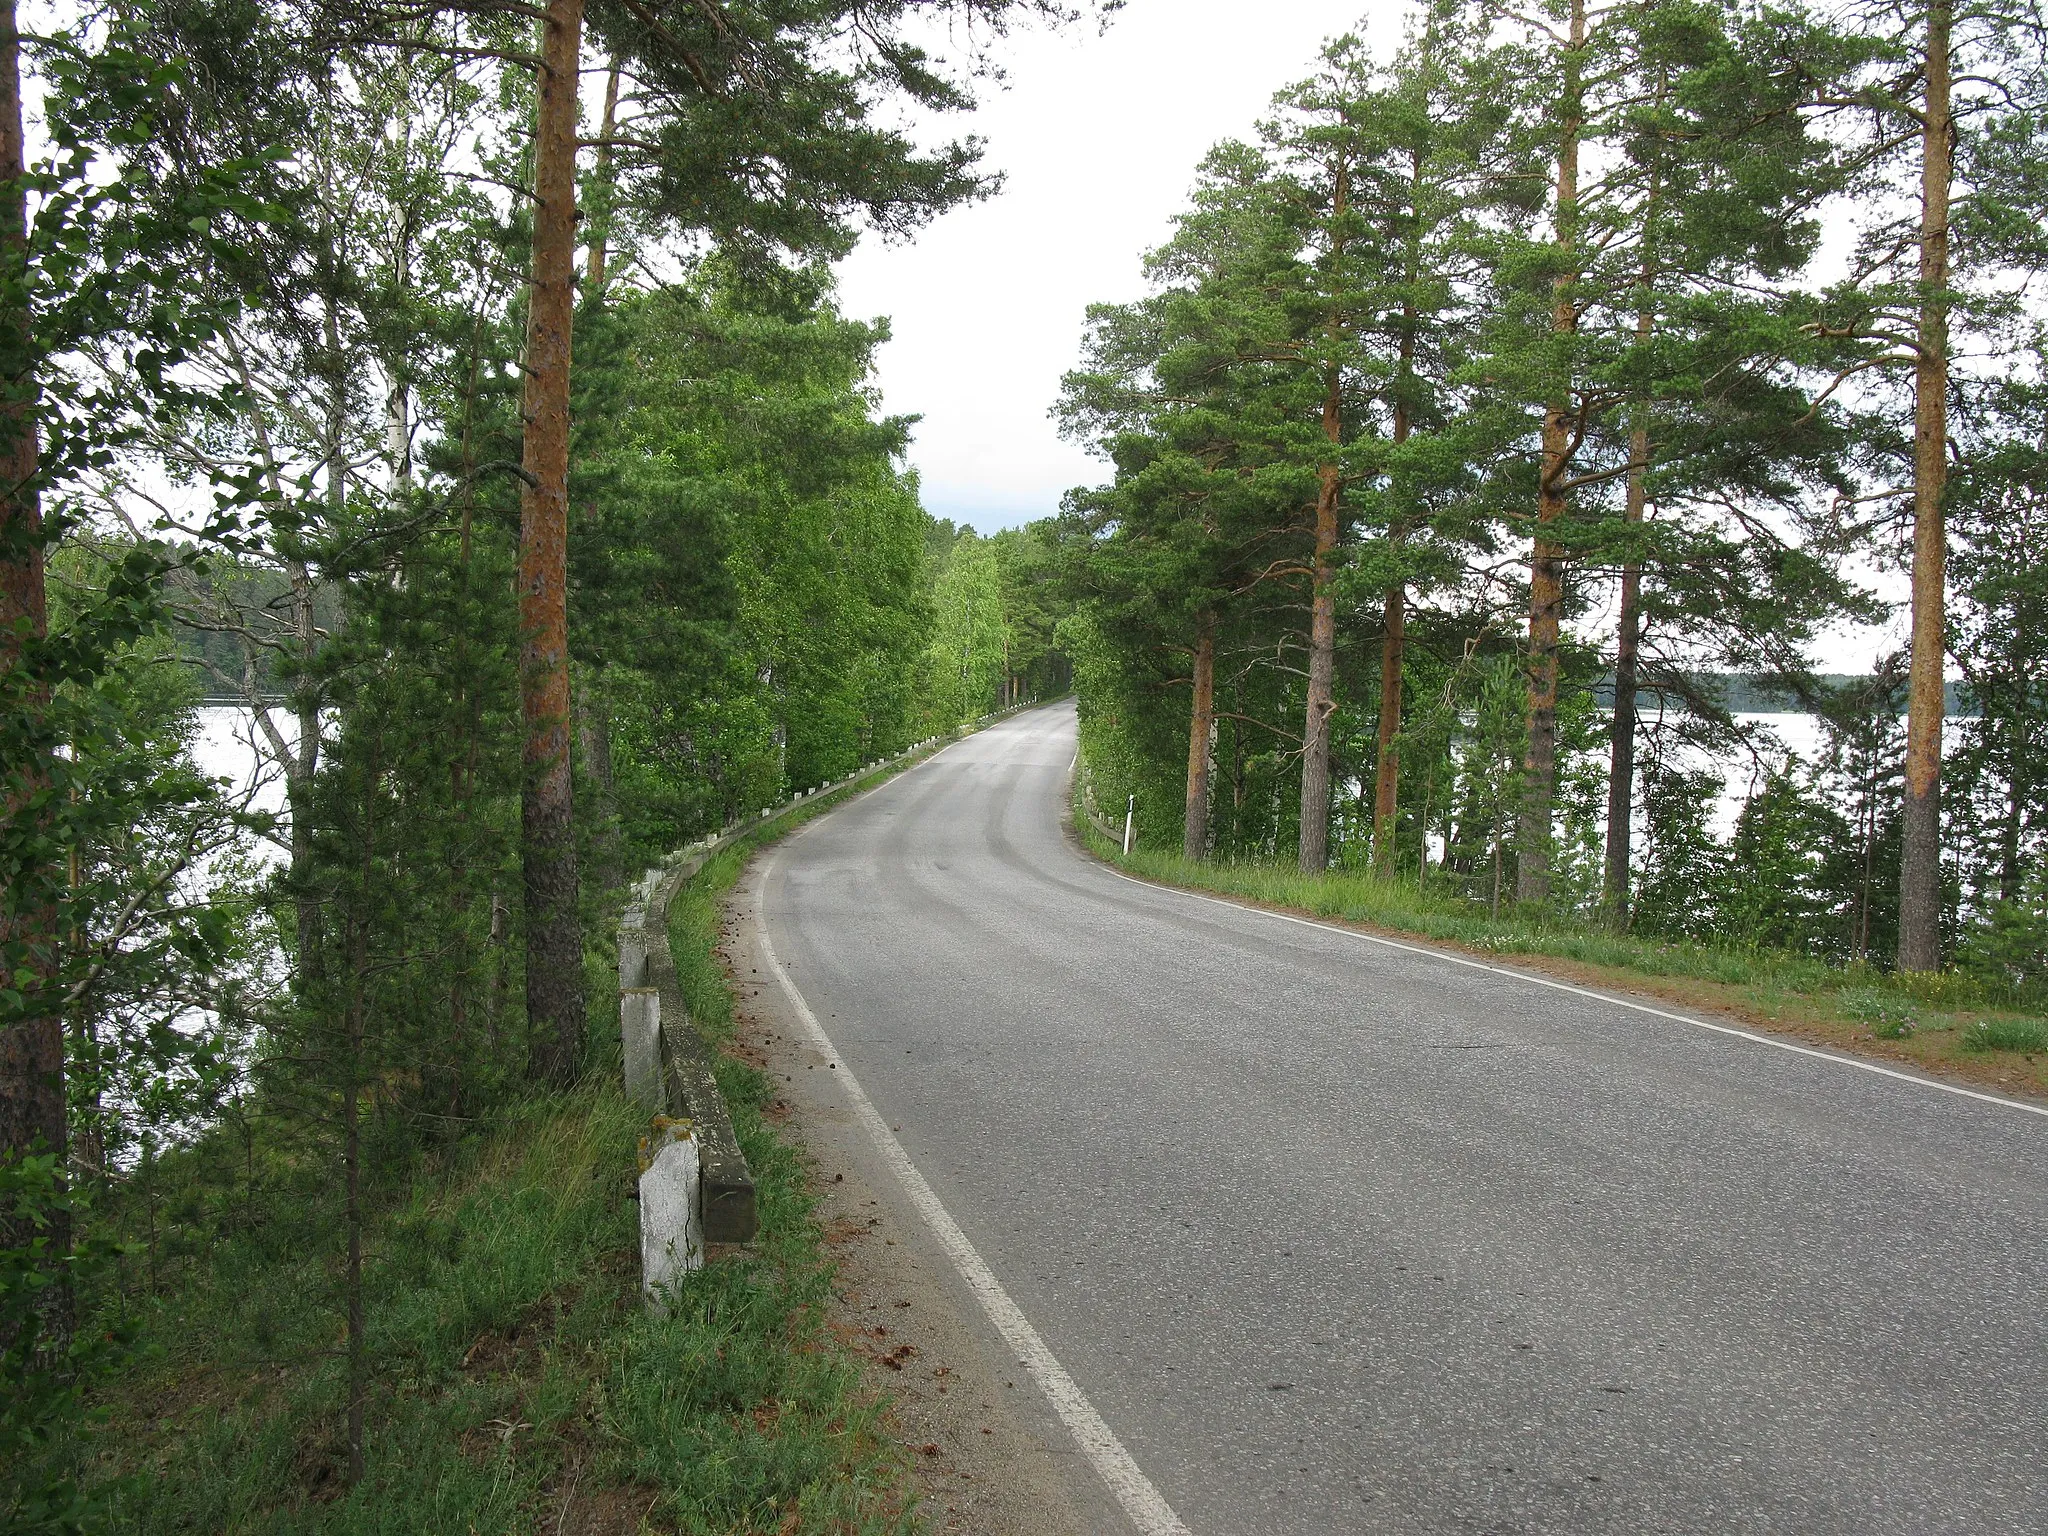 Photo showing: One of the best known spots of the Punkaharju ridge on the connecting road 4792 (former highway 14) in Punkaharju, Finland.